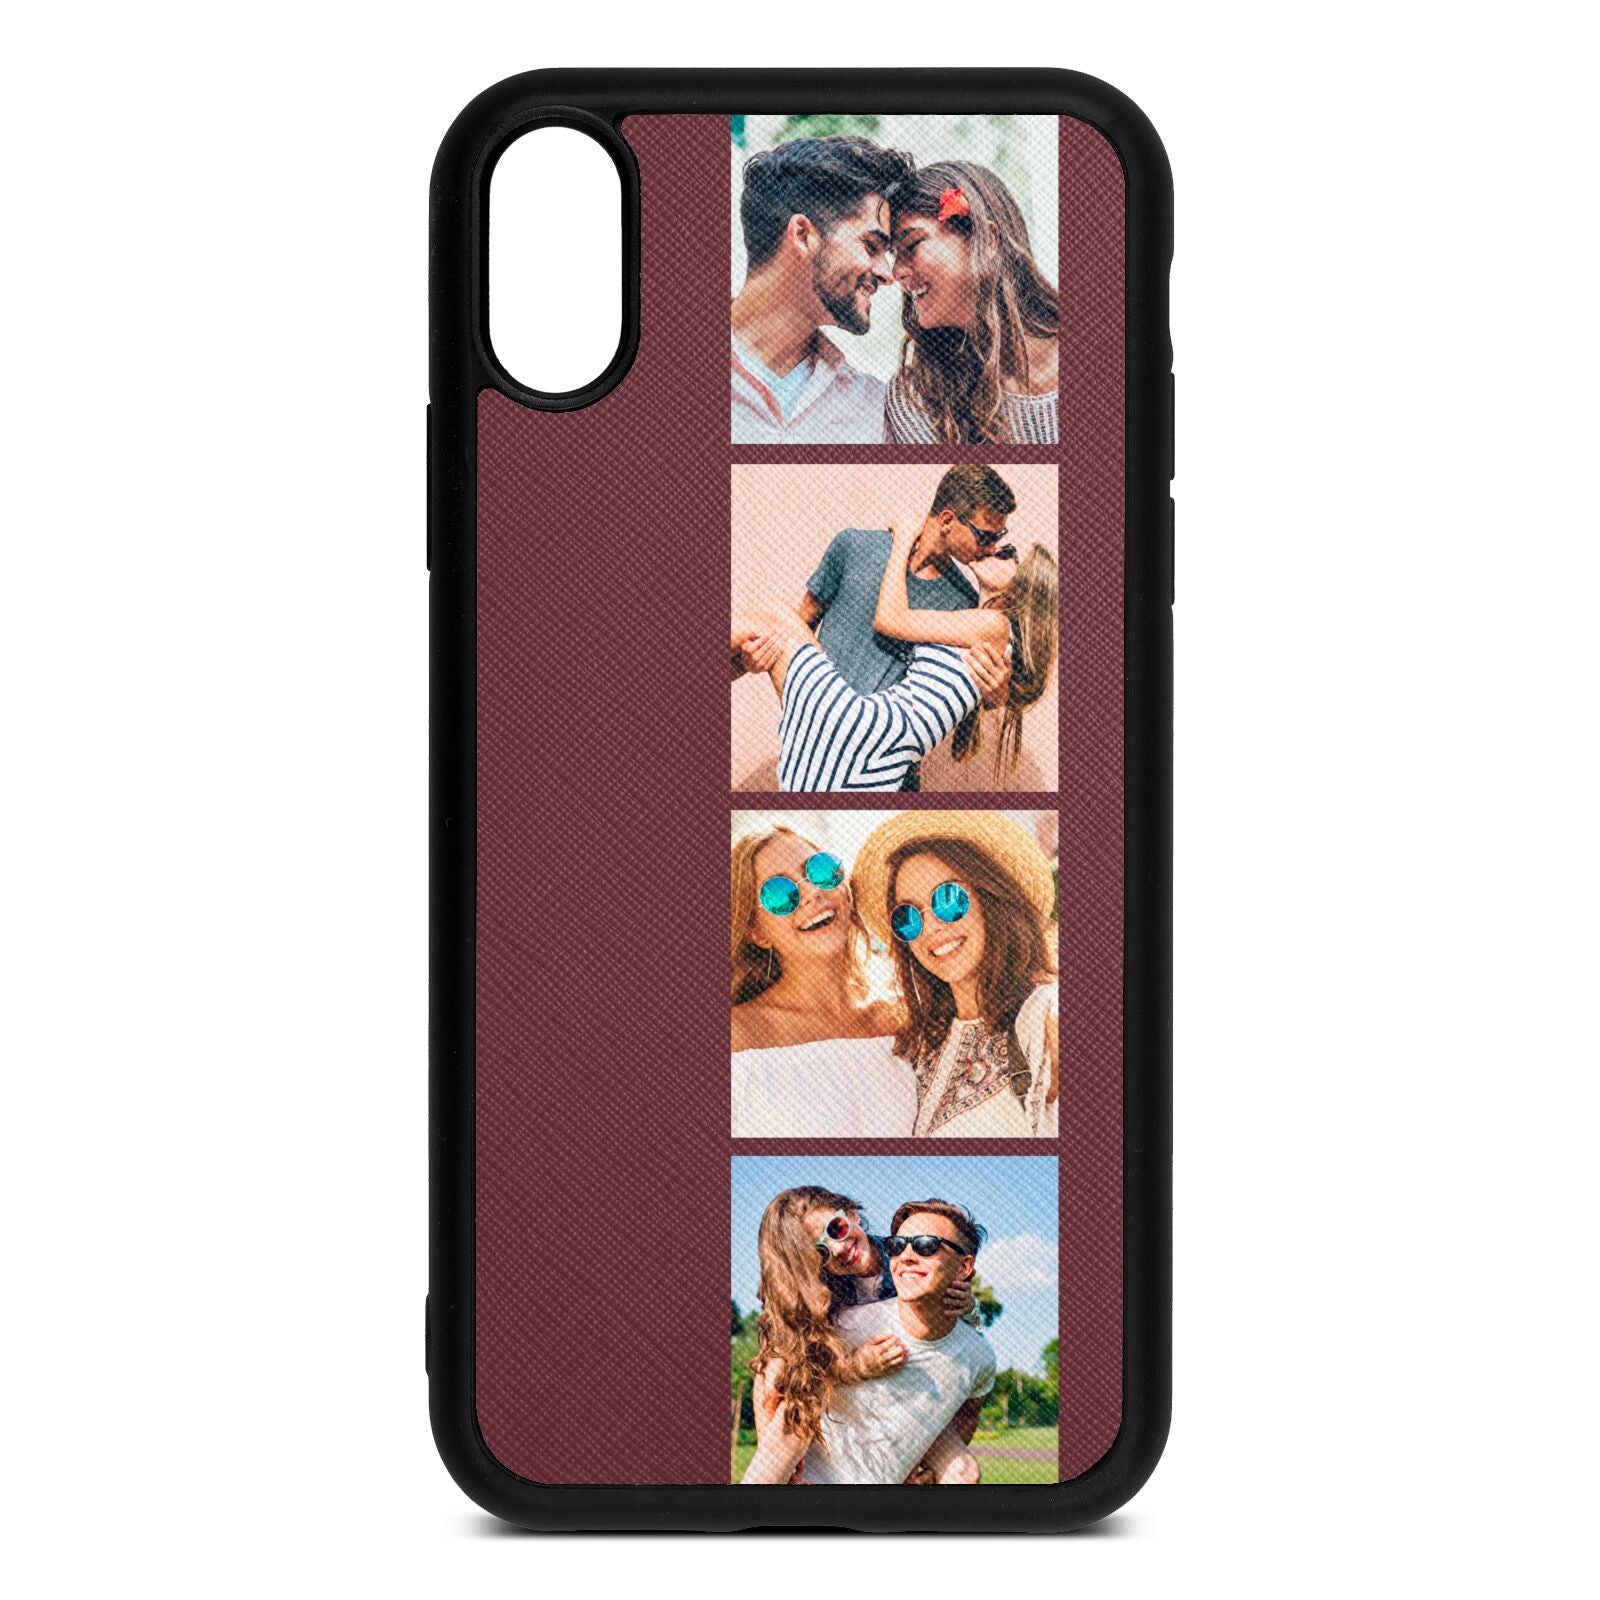 Photo Strip Montage Upload Rose Brown Saffiano Leather iPhone Xr Case